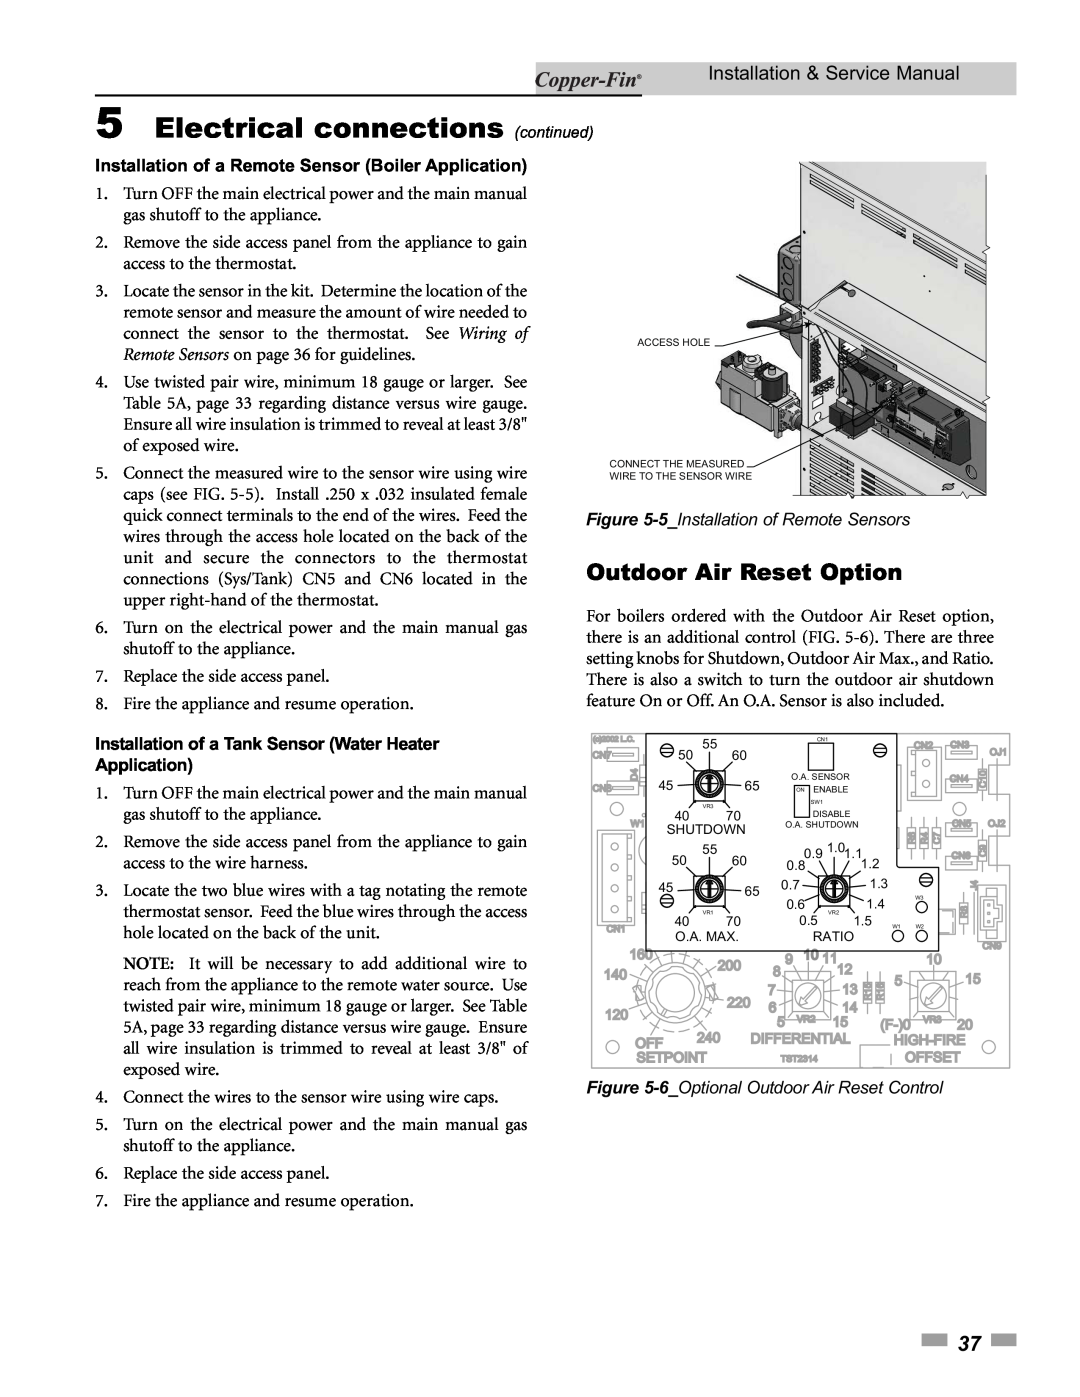 Lochinvar 90, 500 service manual Outdoor Air Reset Option, 5Electrical connections continued, Installation & Service Manual 